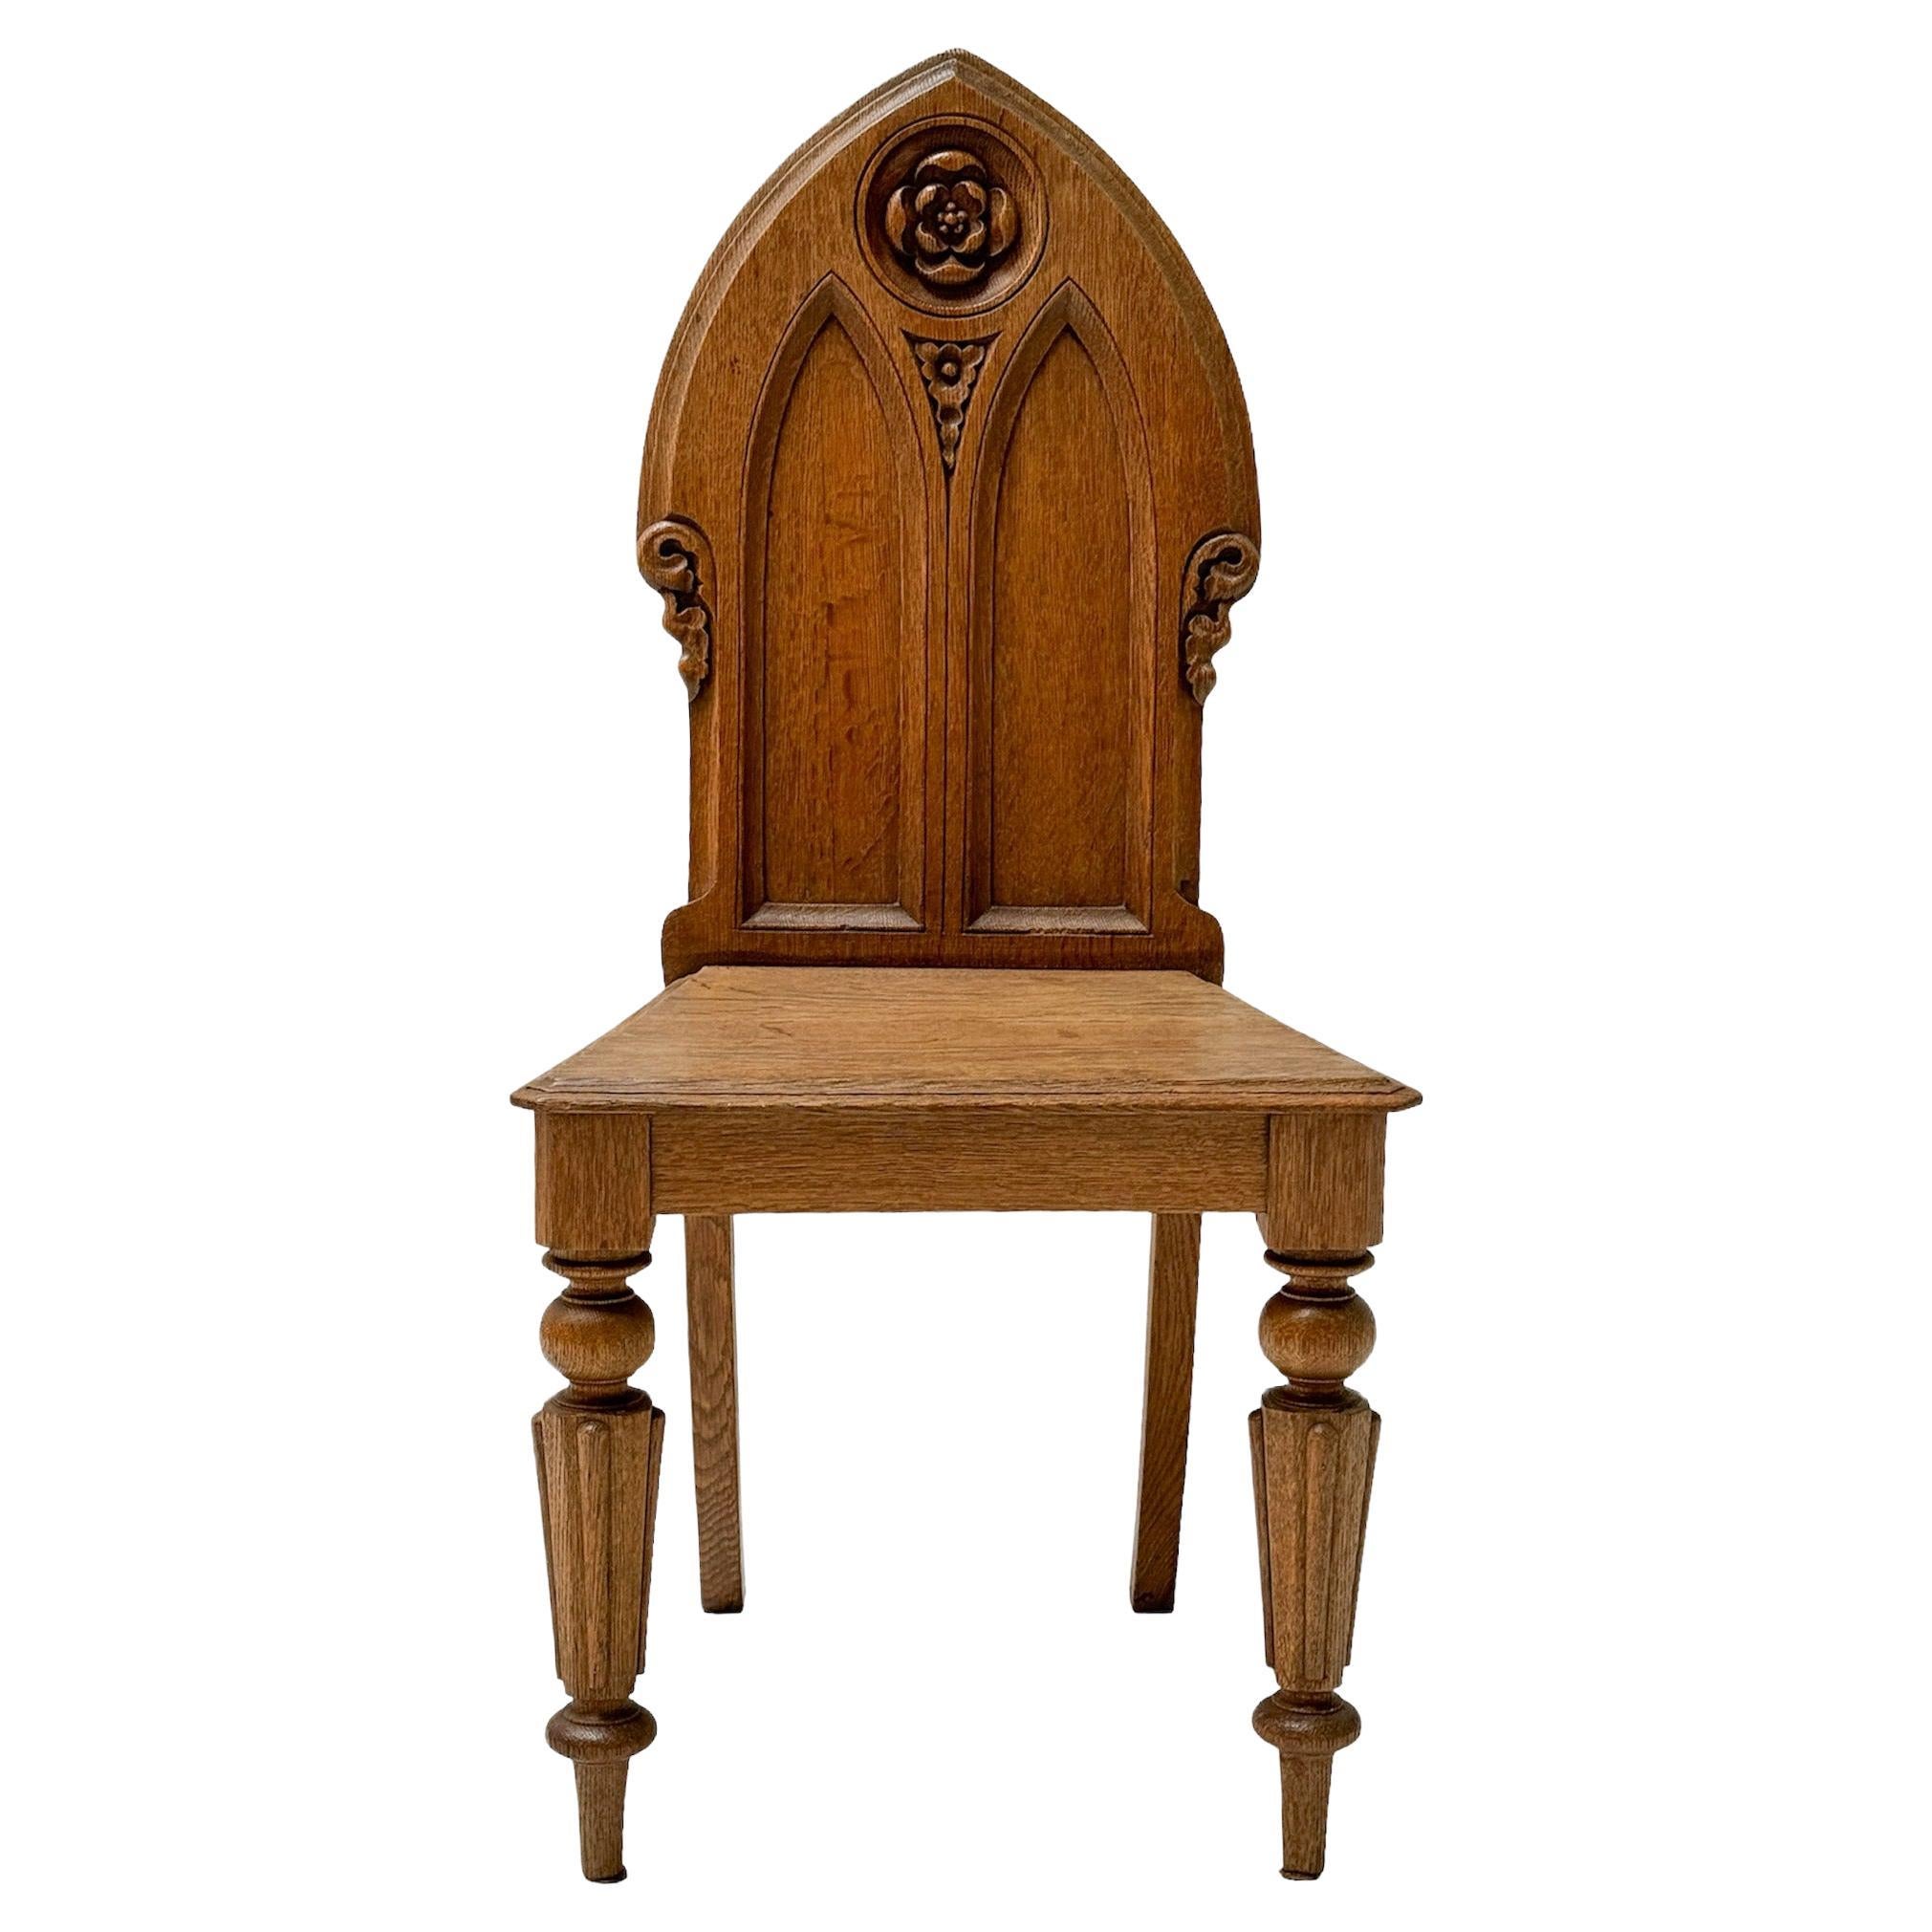 Oak Gothic Revival Hand-Carved Side Chair, 1930s